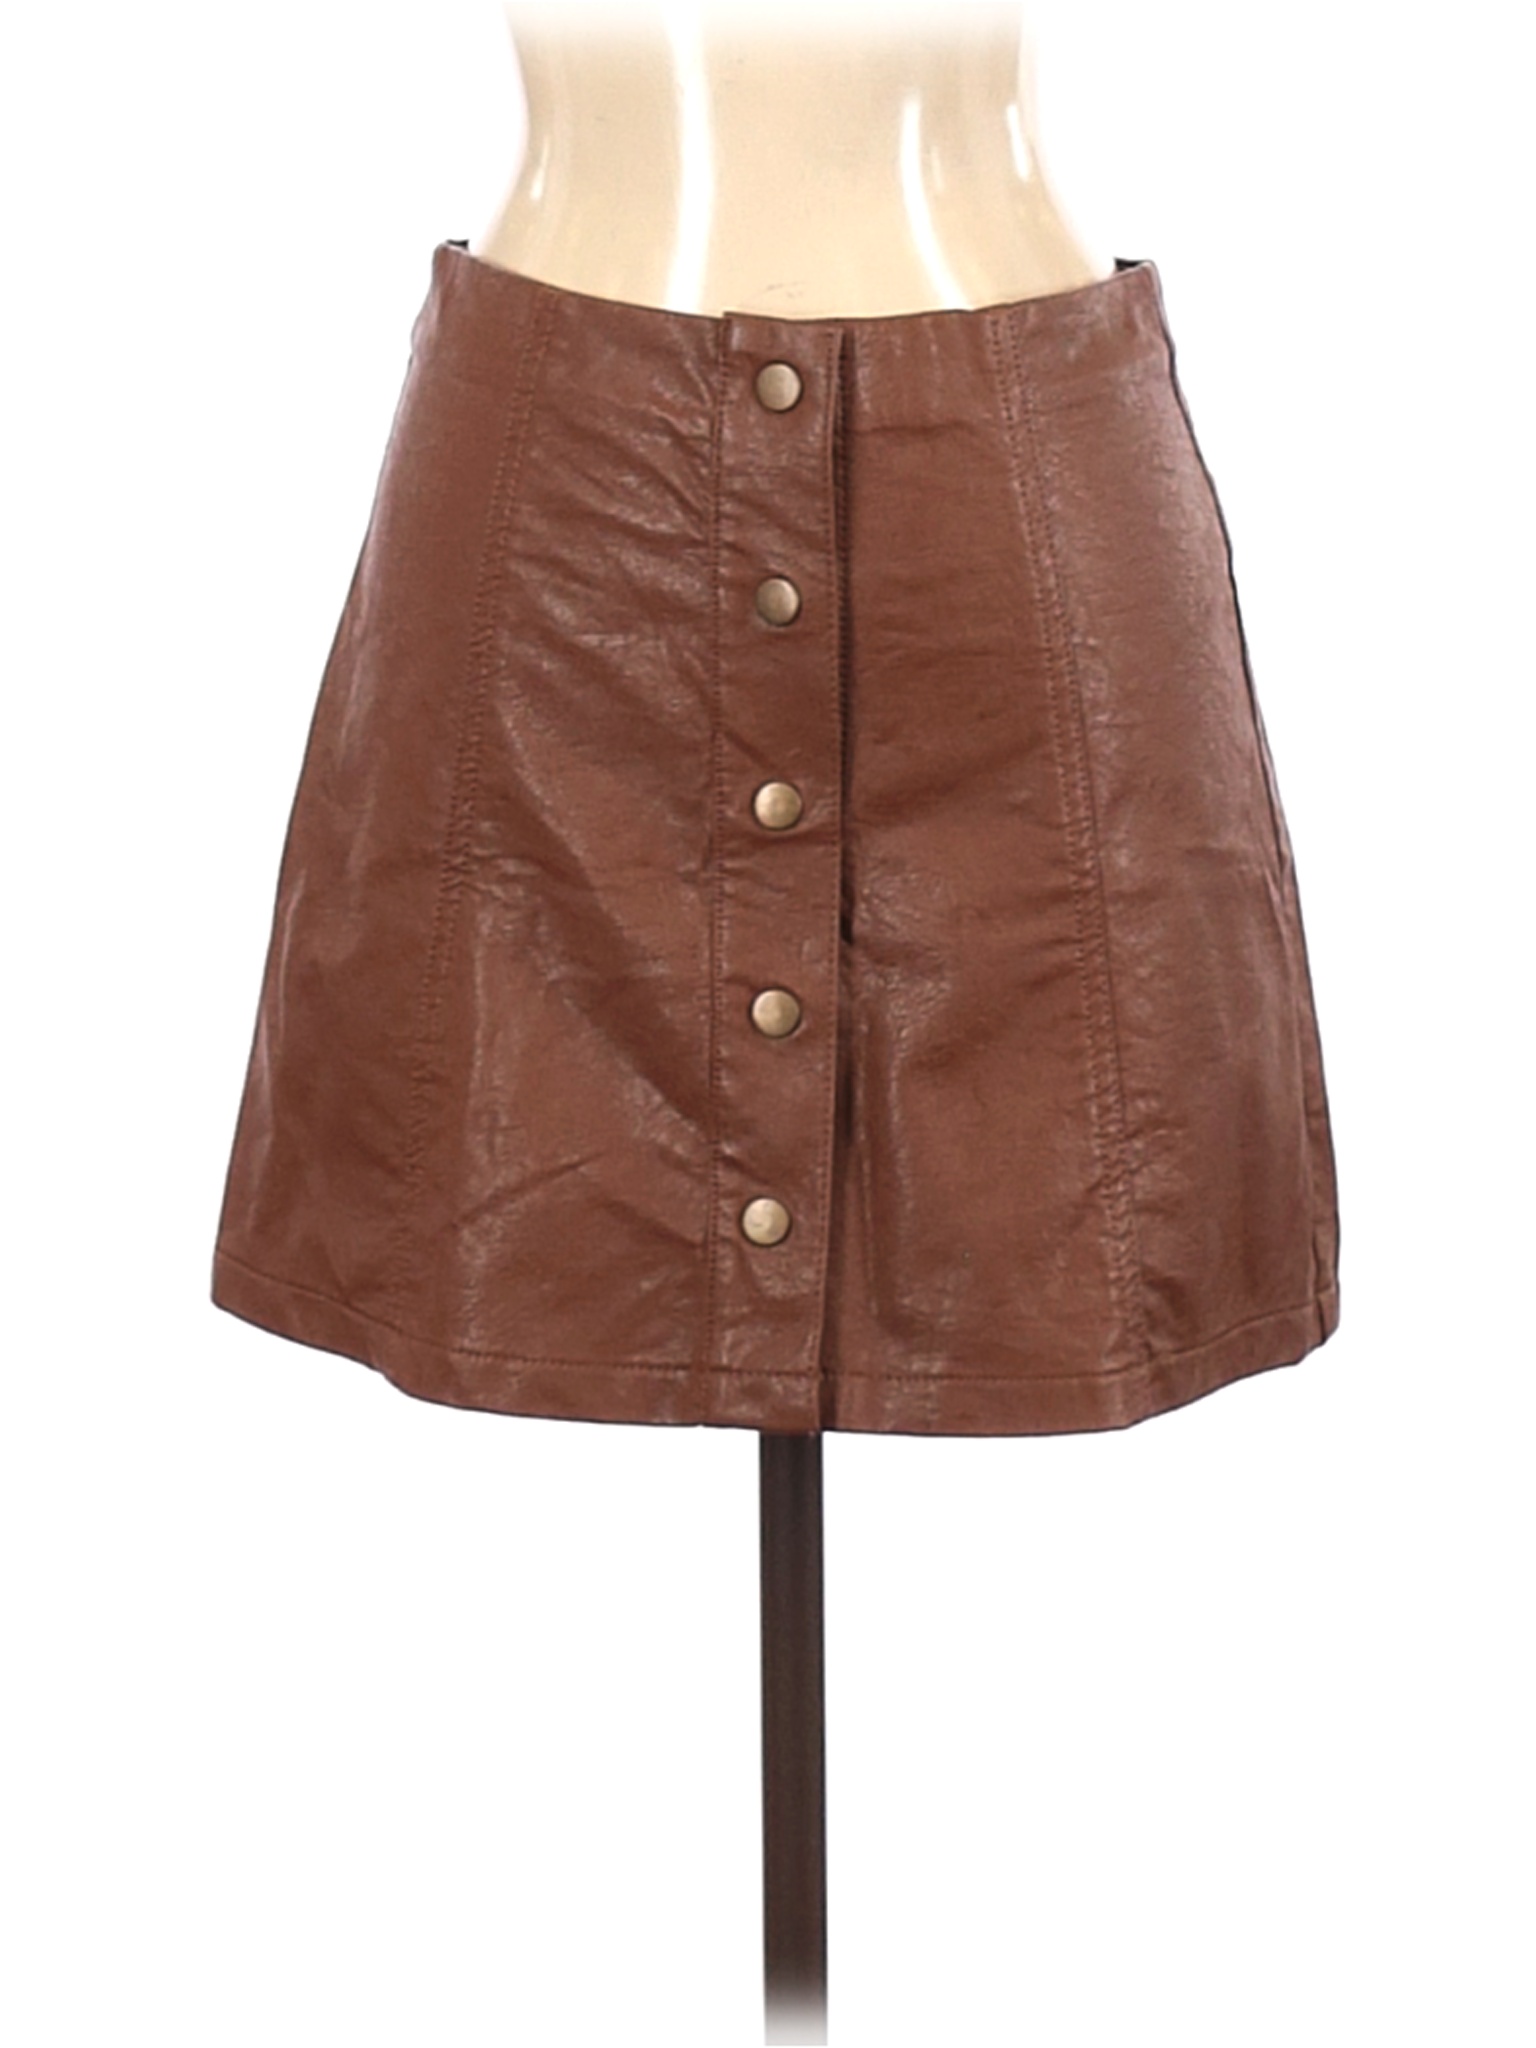 NWT Forever 21 Women Brown Faux Leather Skirt S | eBay